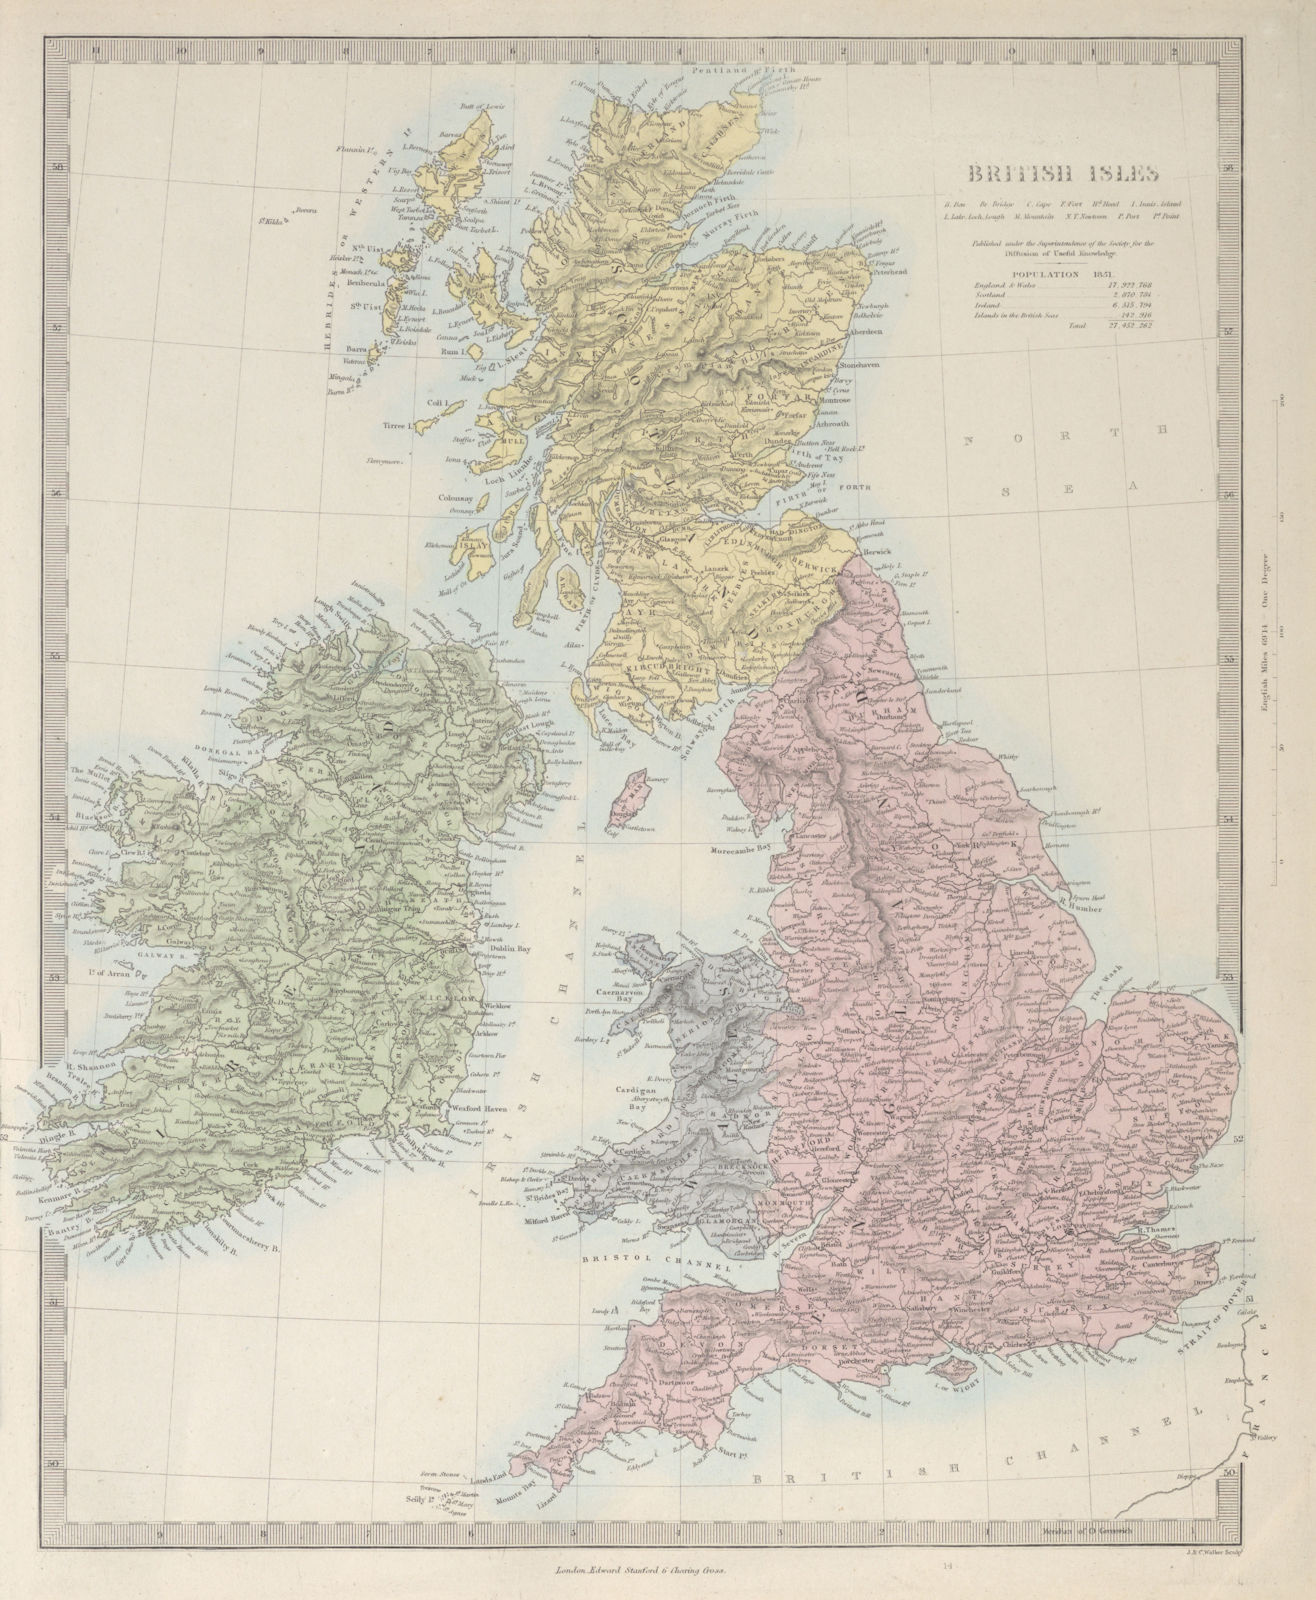 Associate Product BRITISH ISLES. United Kingdom & Ireland. Counties towns rivers. SDUK 1857 map